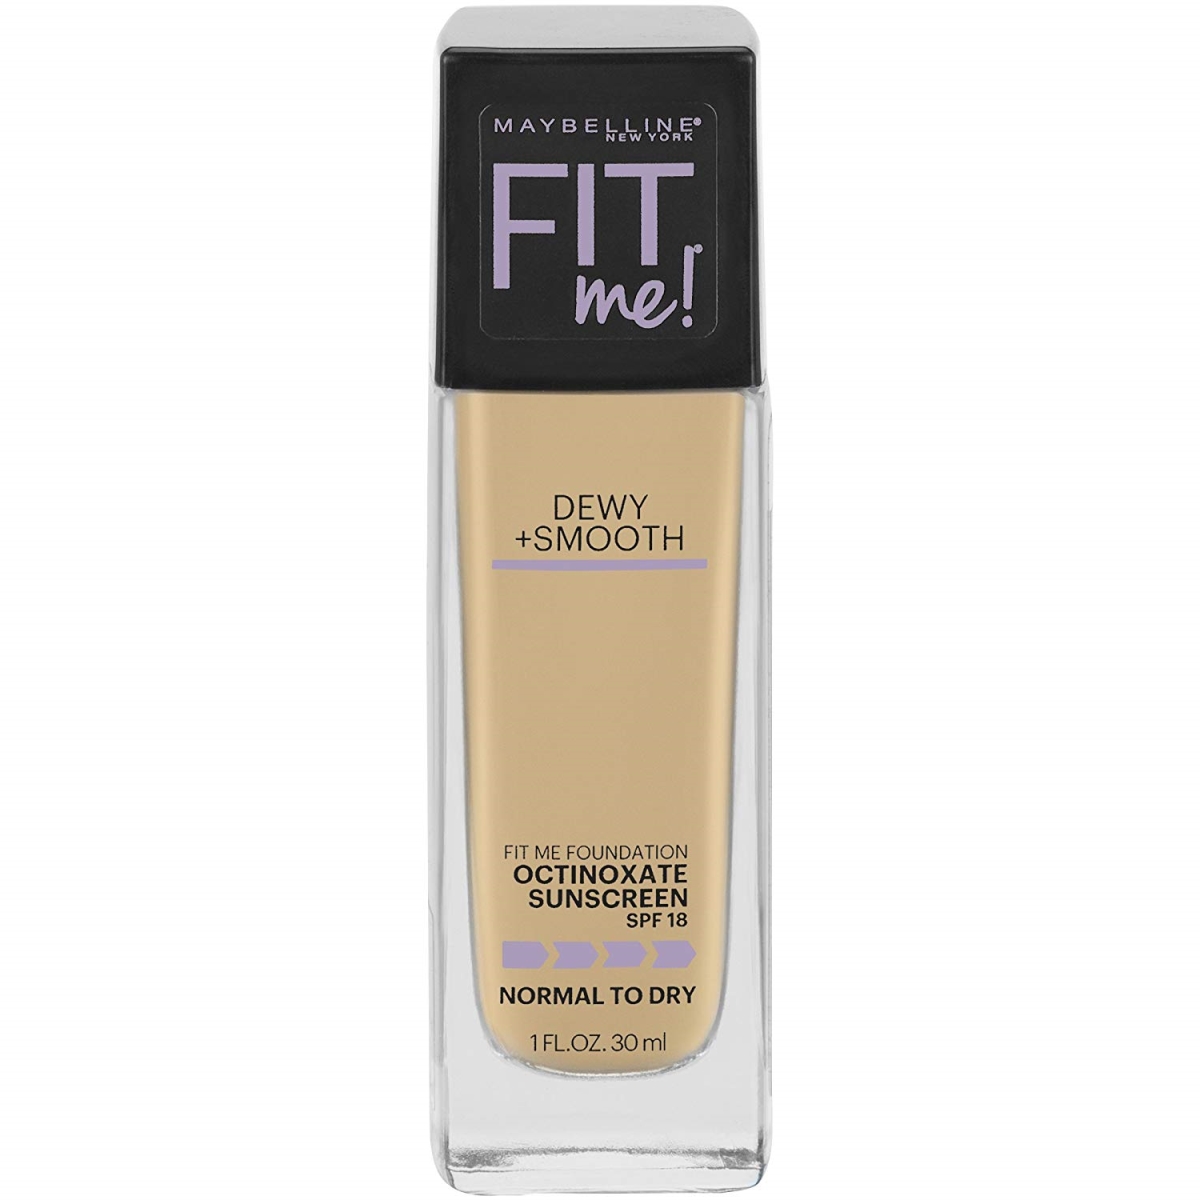 7712359 Fit Me Dewy Plus Smooth Foundation, 118 Light Beige - Pack Of 2